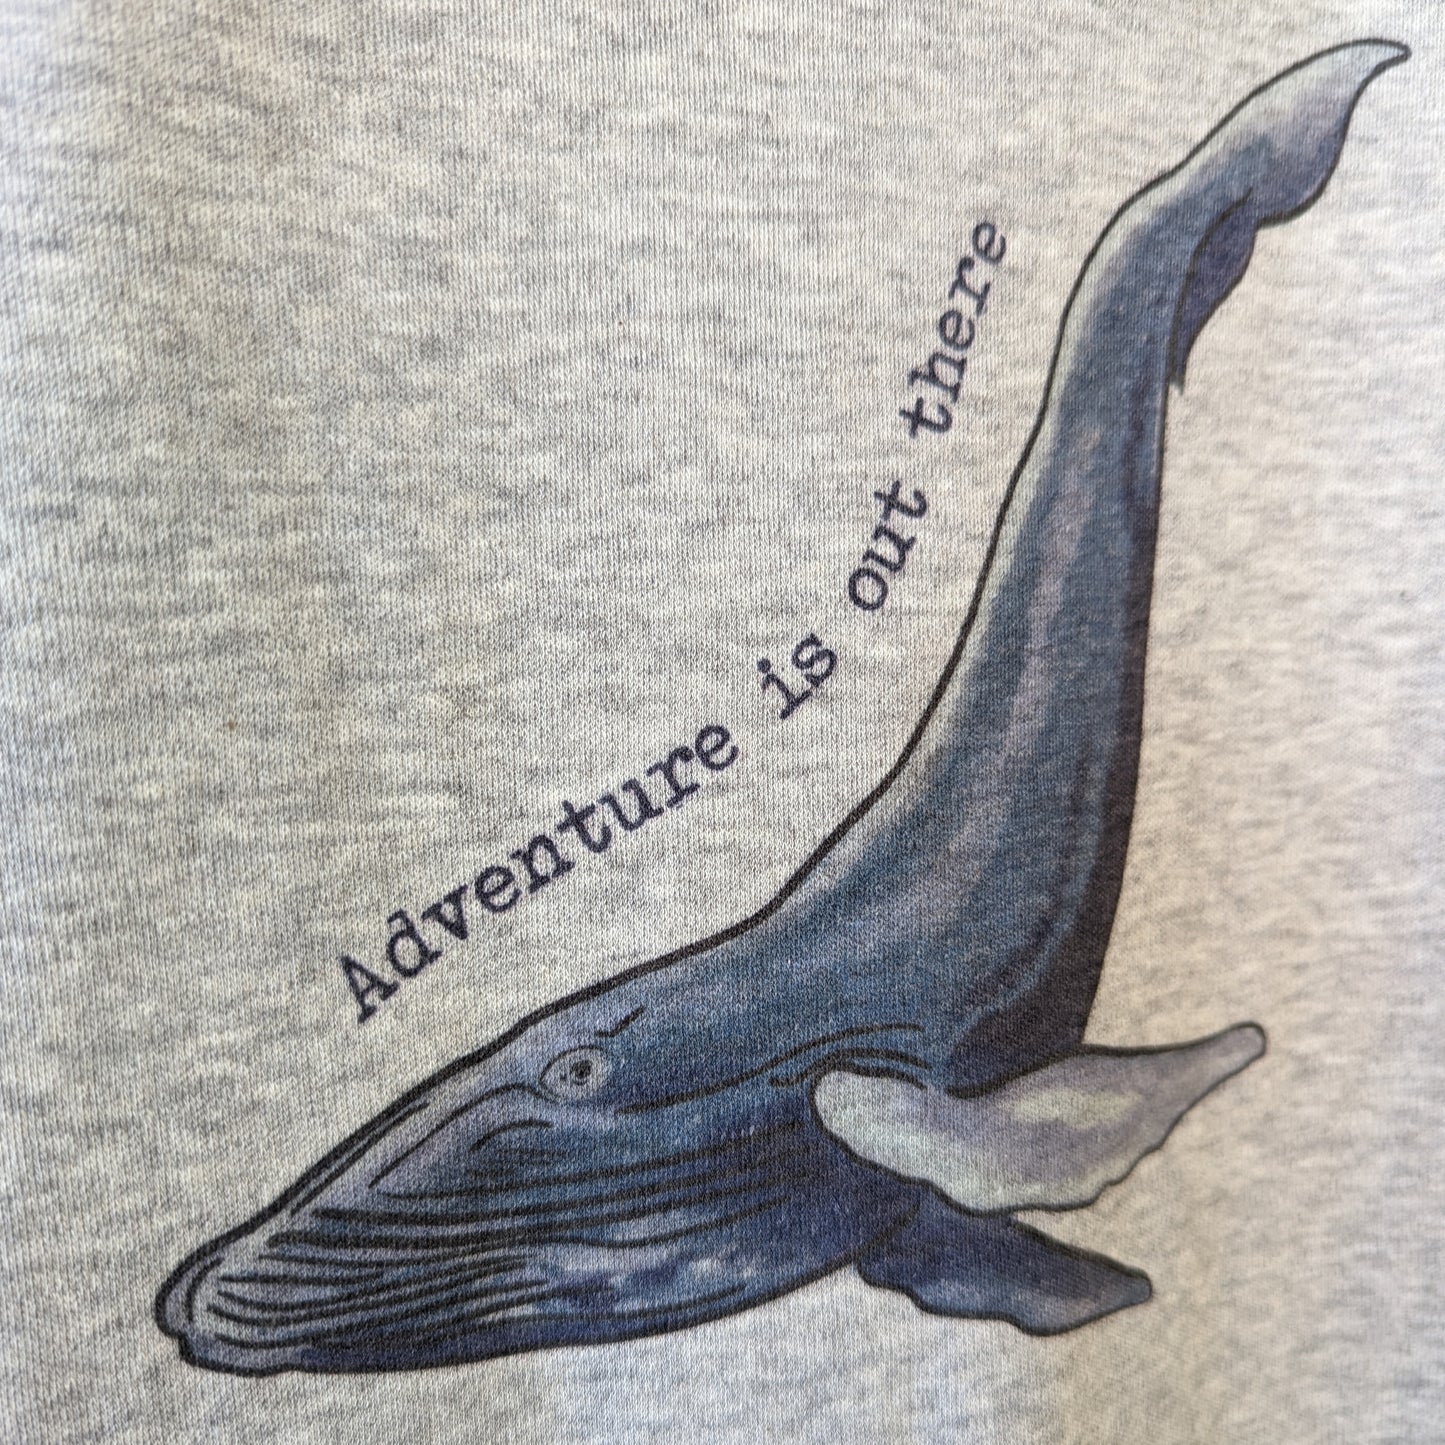 Adventure is out there Beach Whale Tee Toddlers and Youth